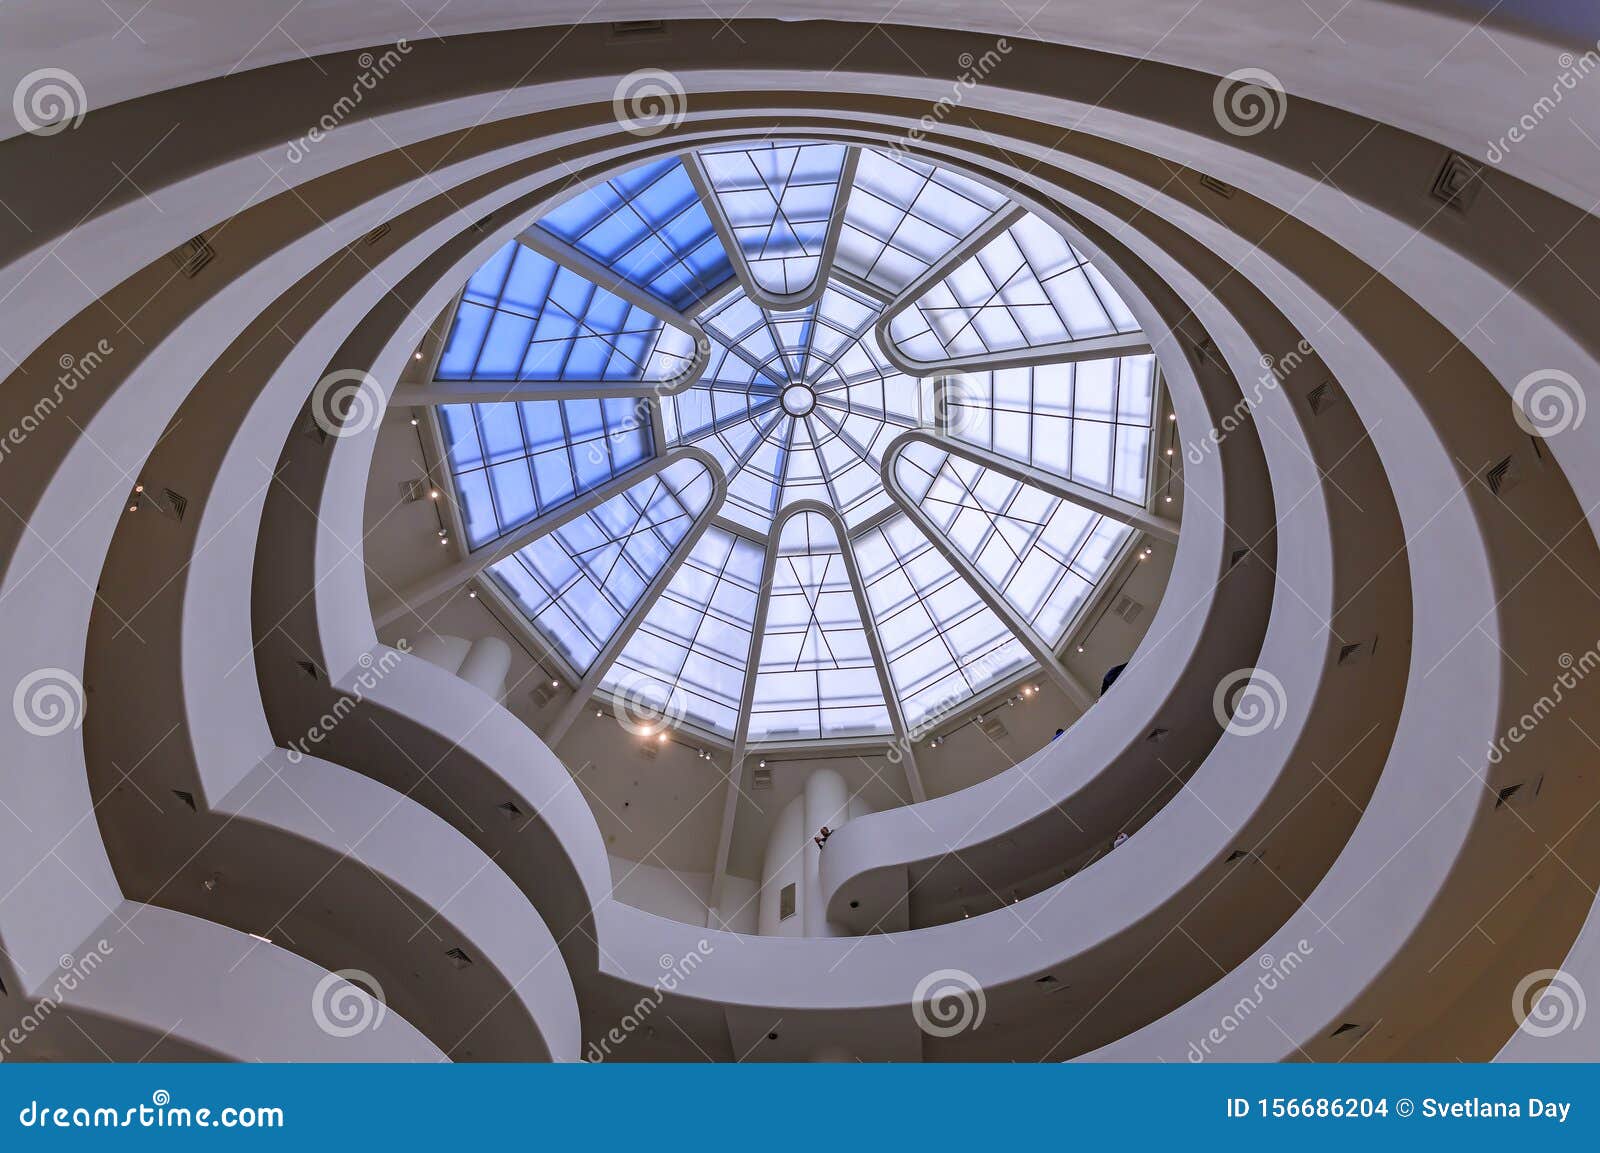 Home | The Guggenheim Museums and Foundation